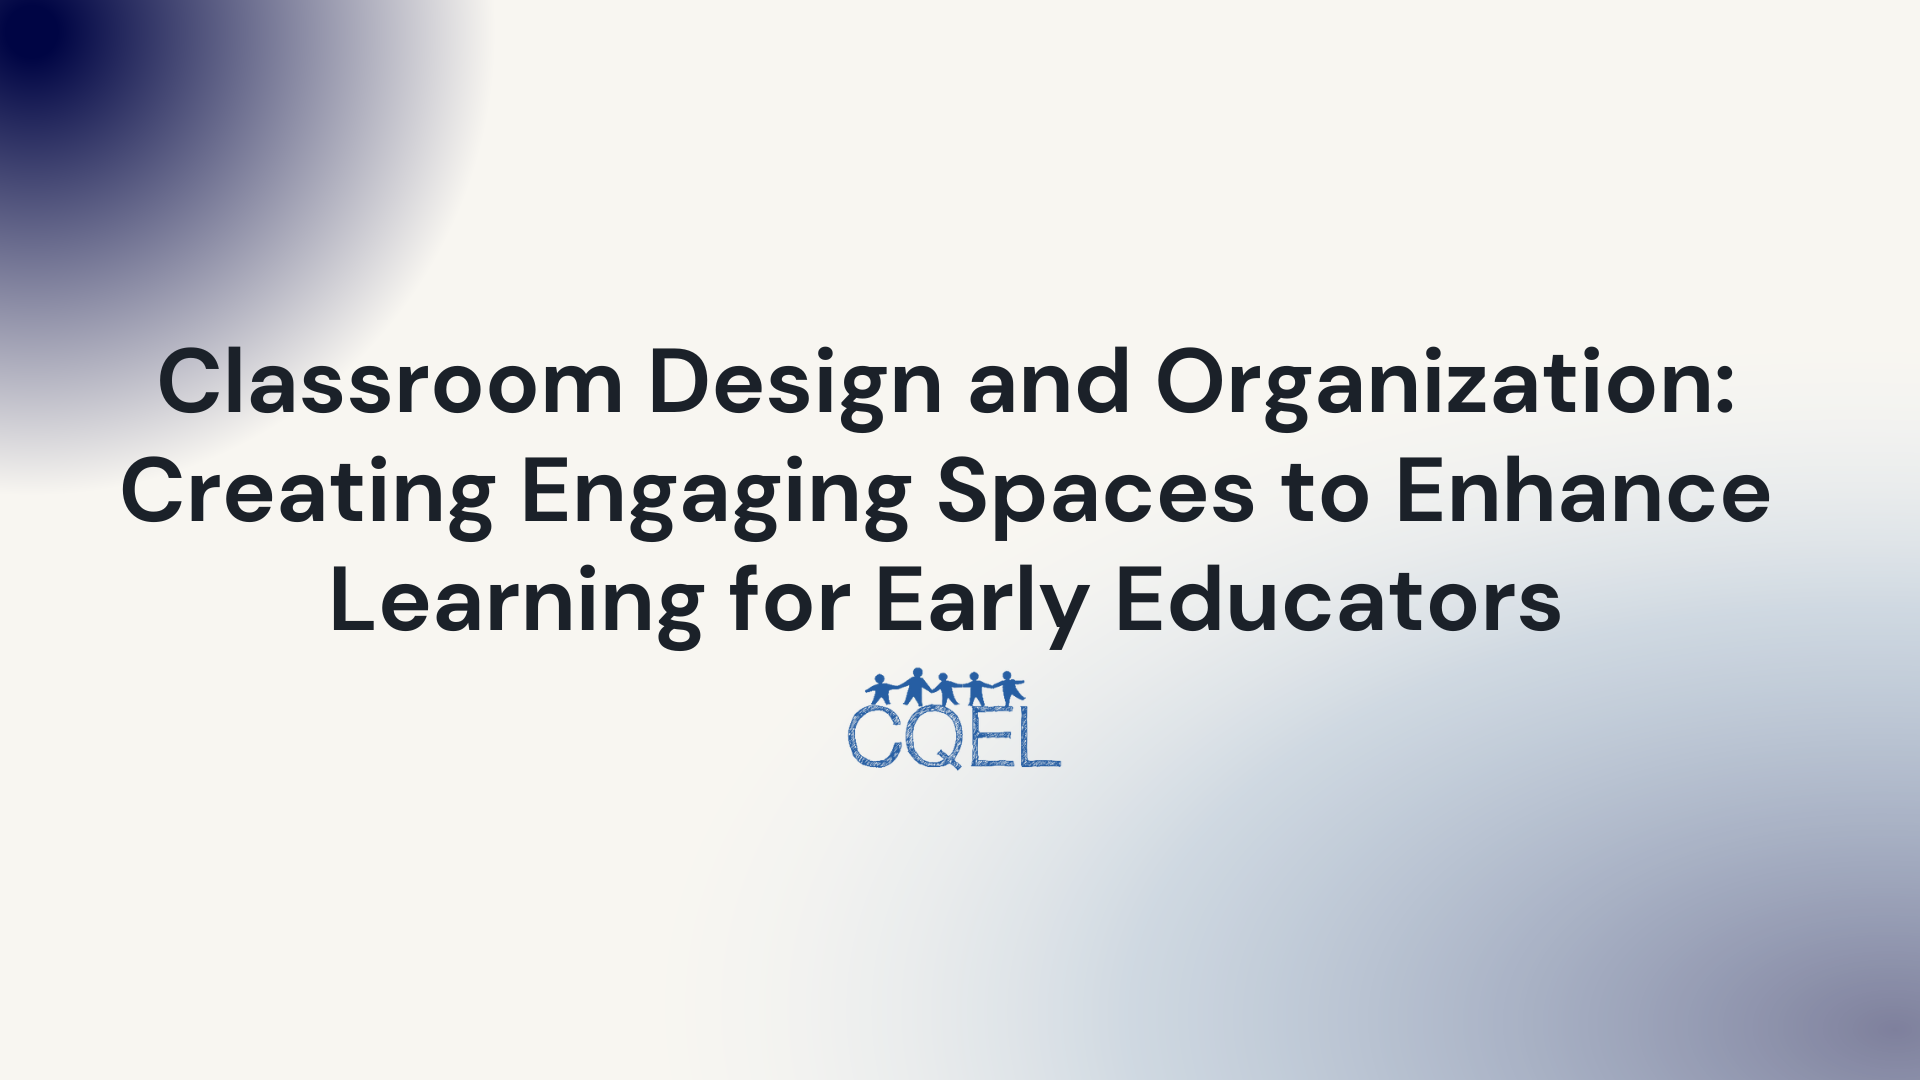 Classroom Design and Organization: Creating Engaging Spaces to Enhance Learning for Early Educators